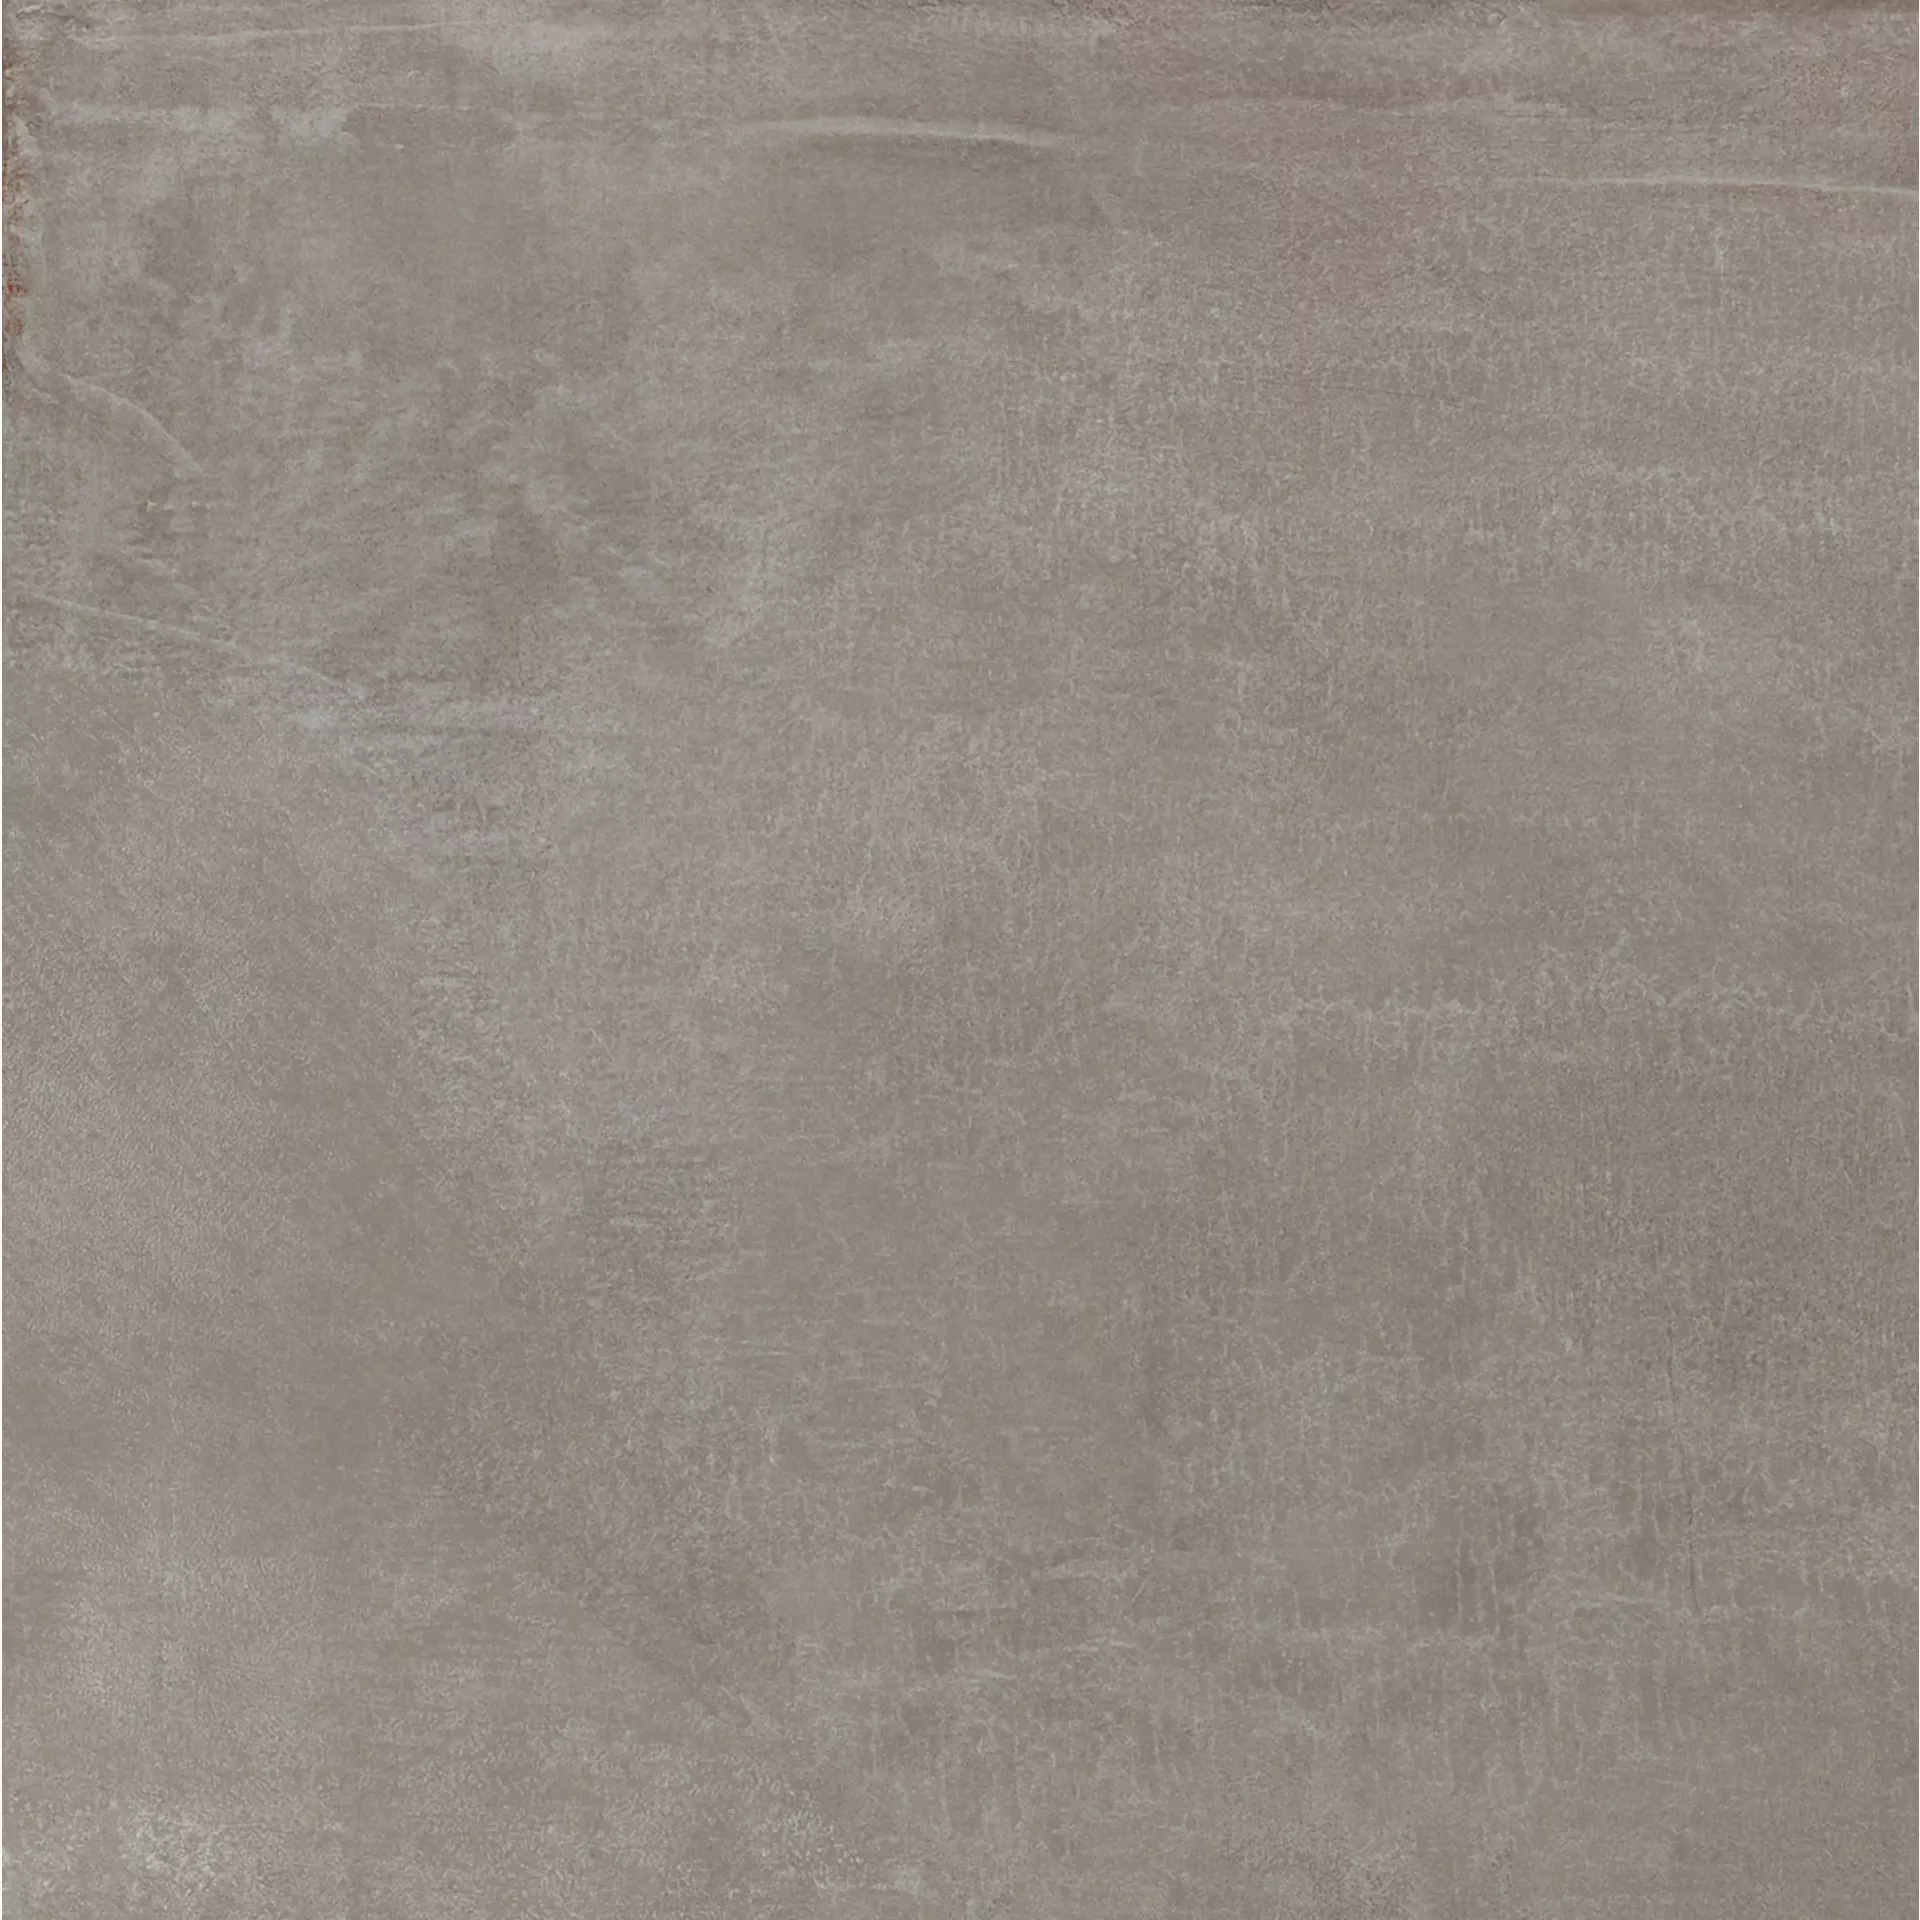 Keope Noord Taupe Naturale – Matt 45444832 60x60cm rectified 9mm